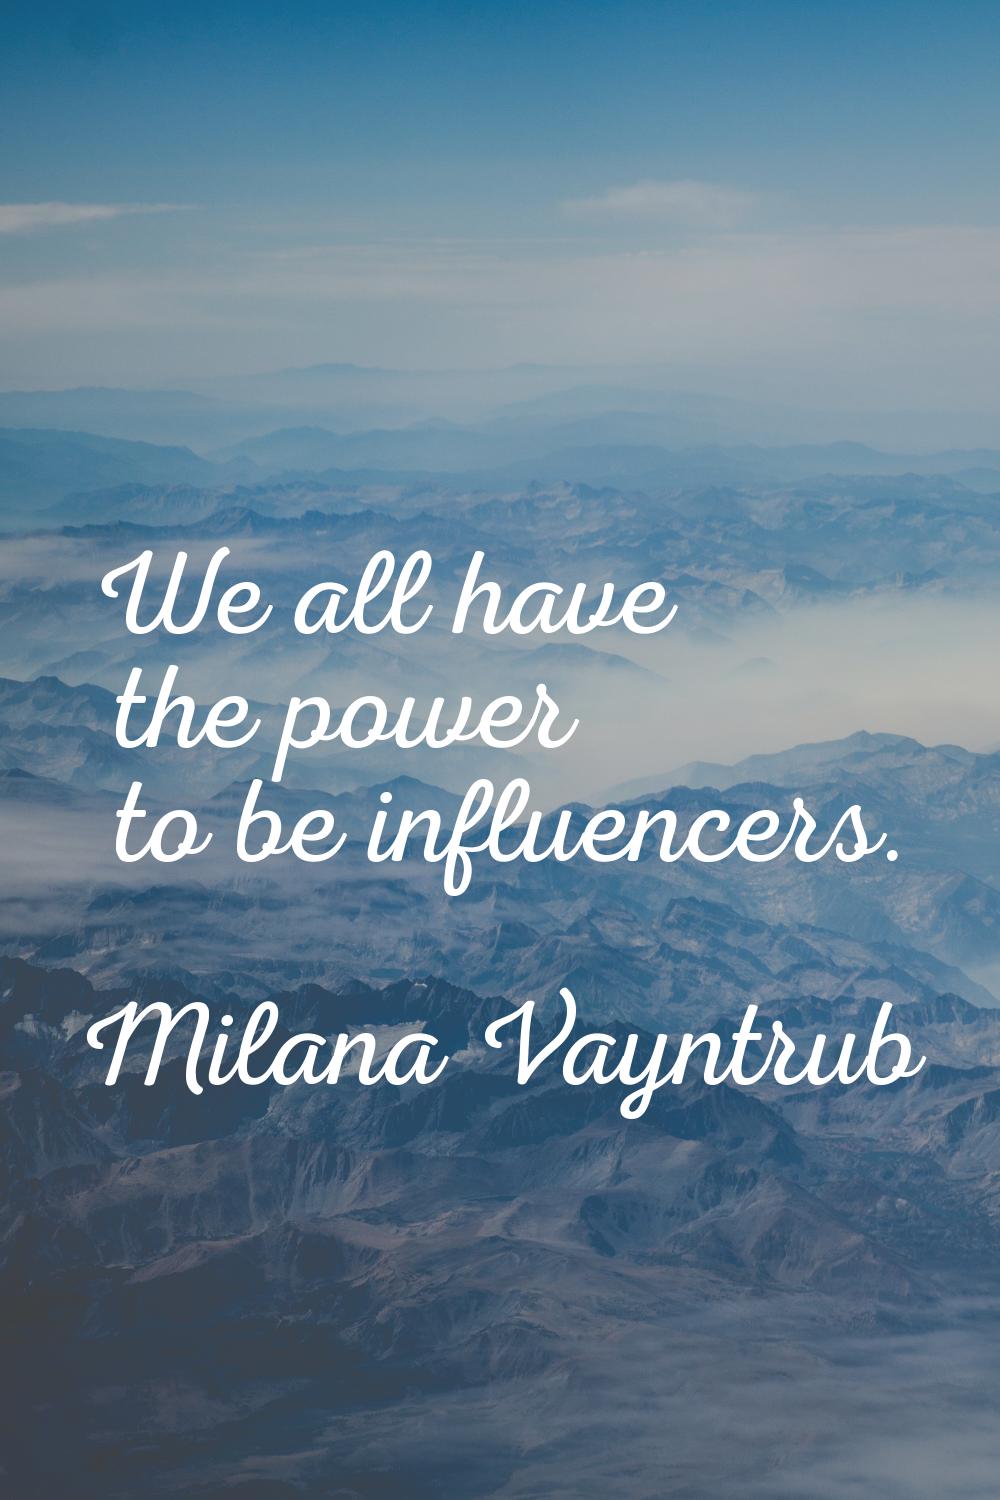 We all have the power to be influencers.